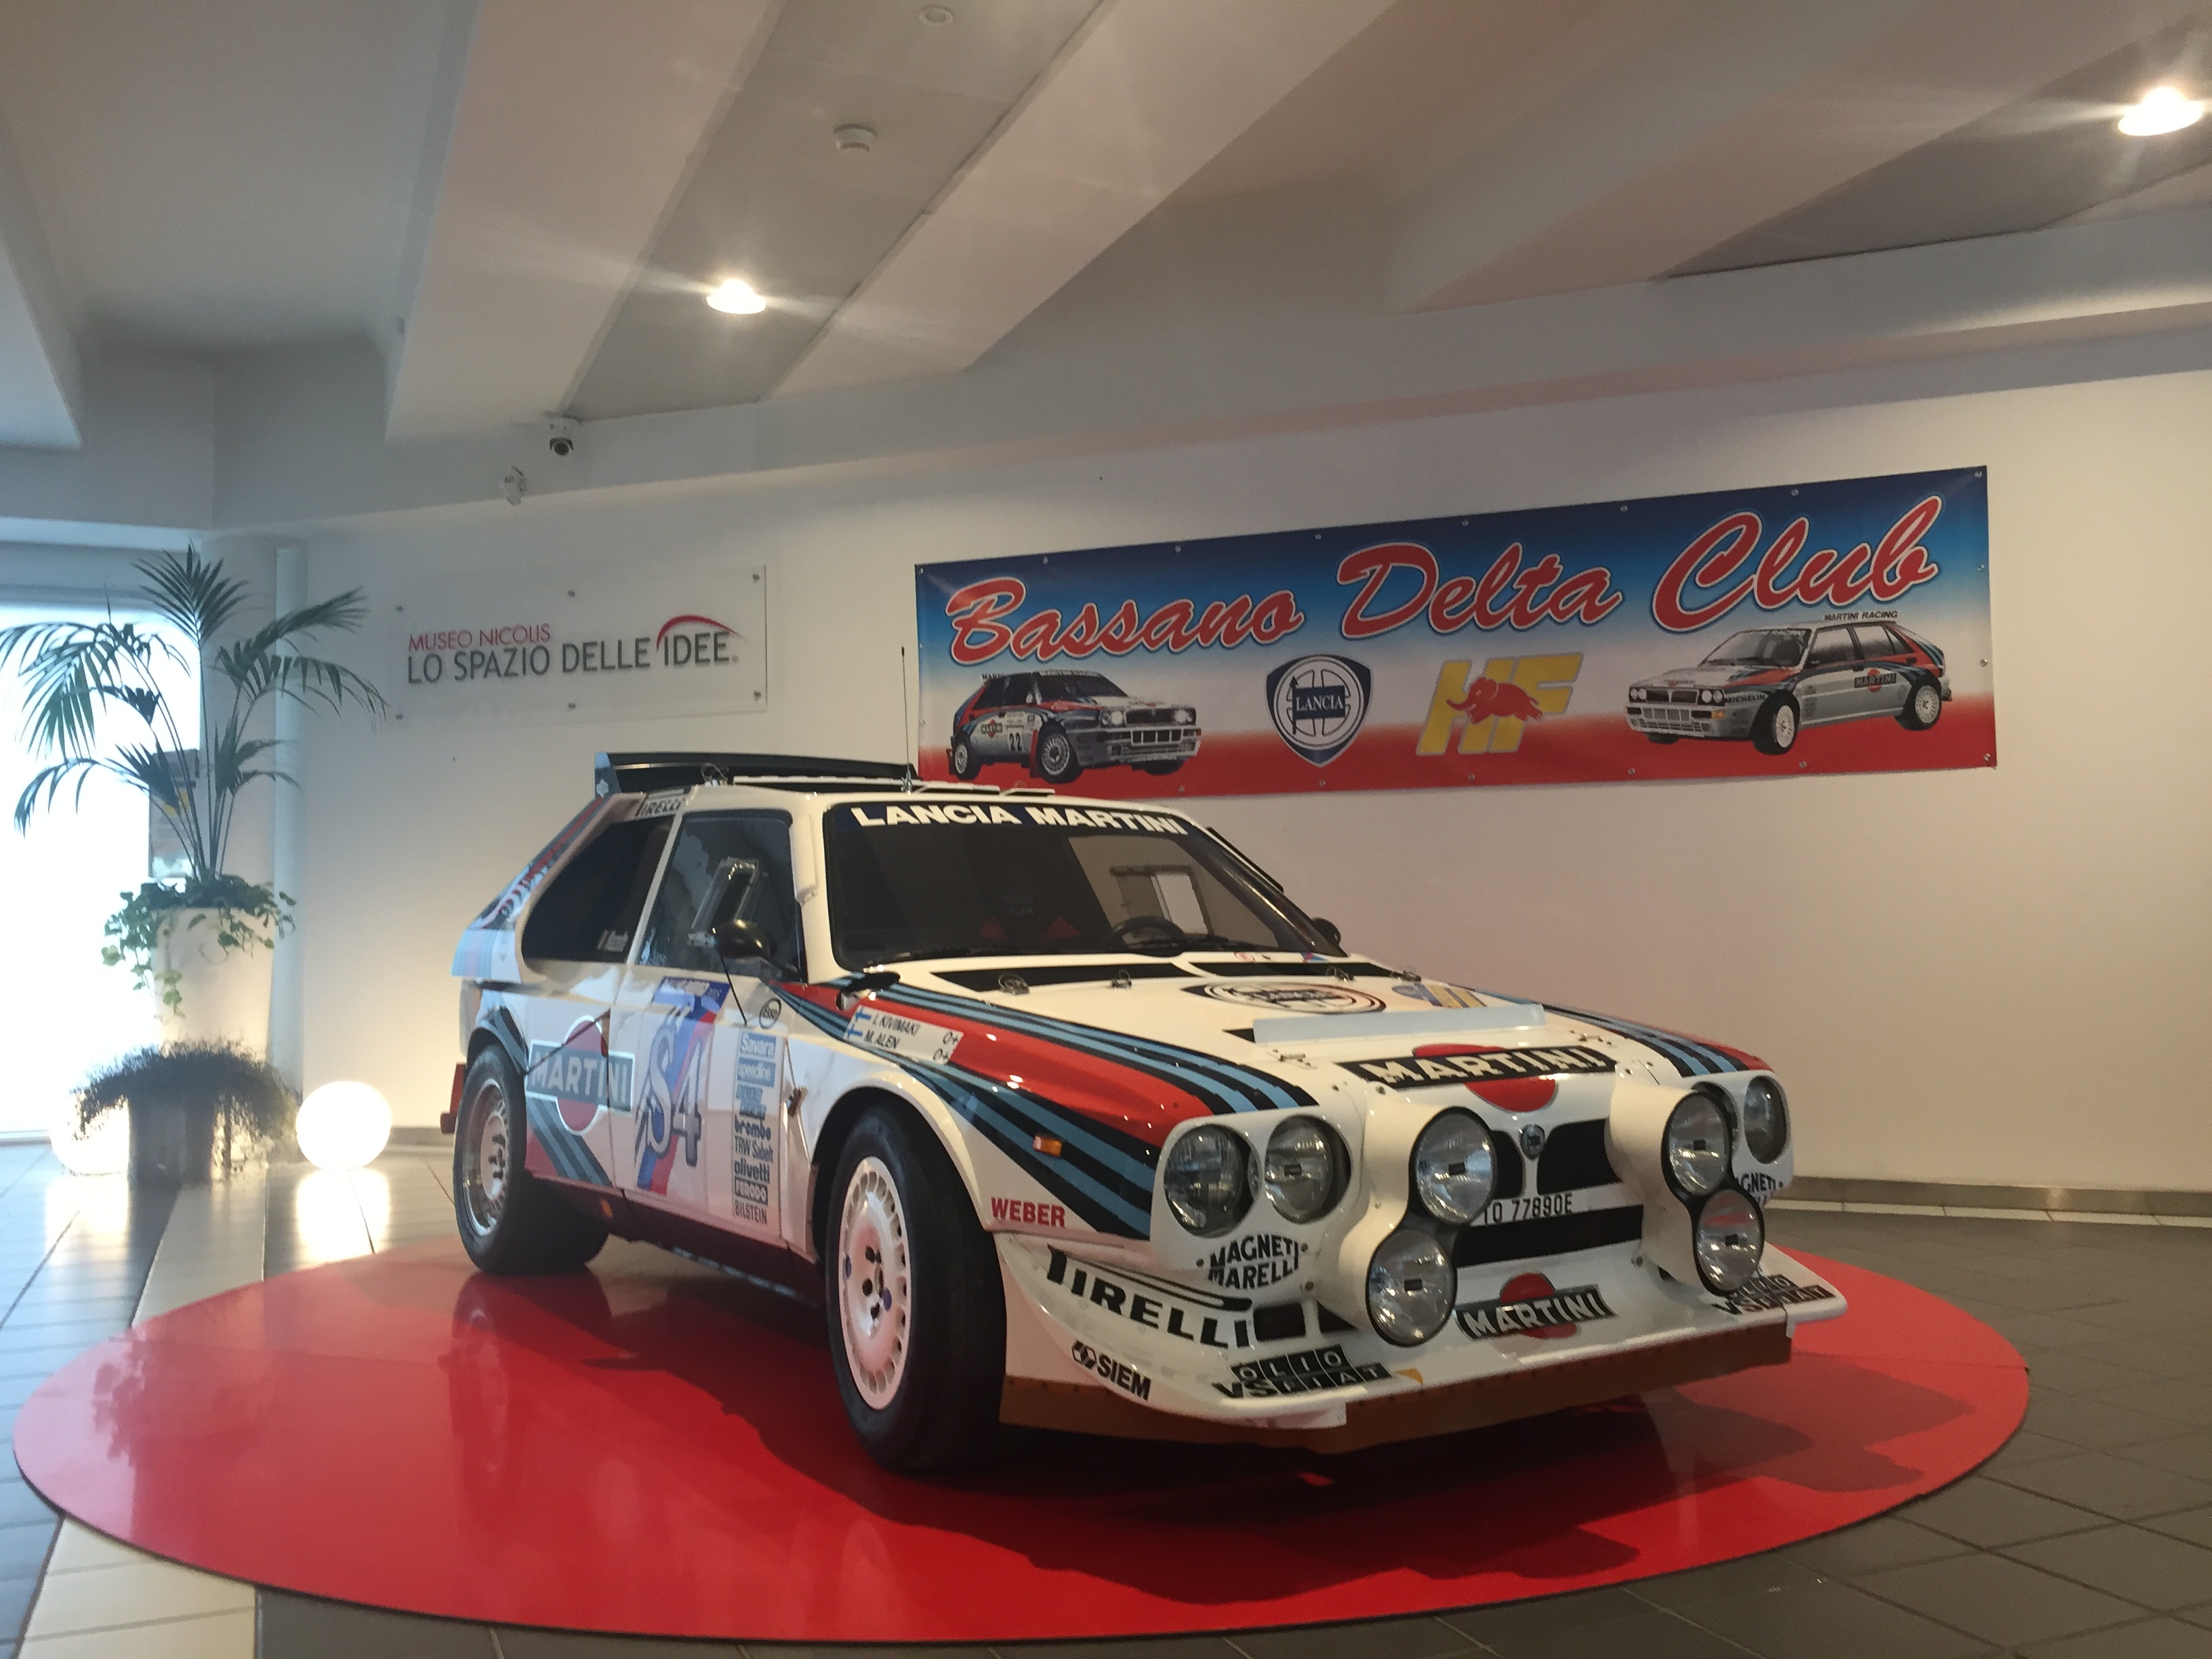 Bassano Delta Club Meeting – Special guest Miki Biasion